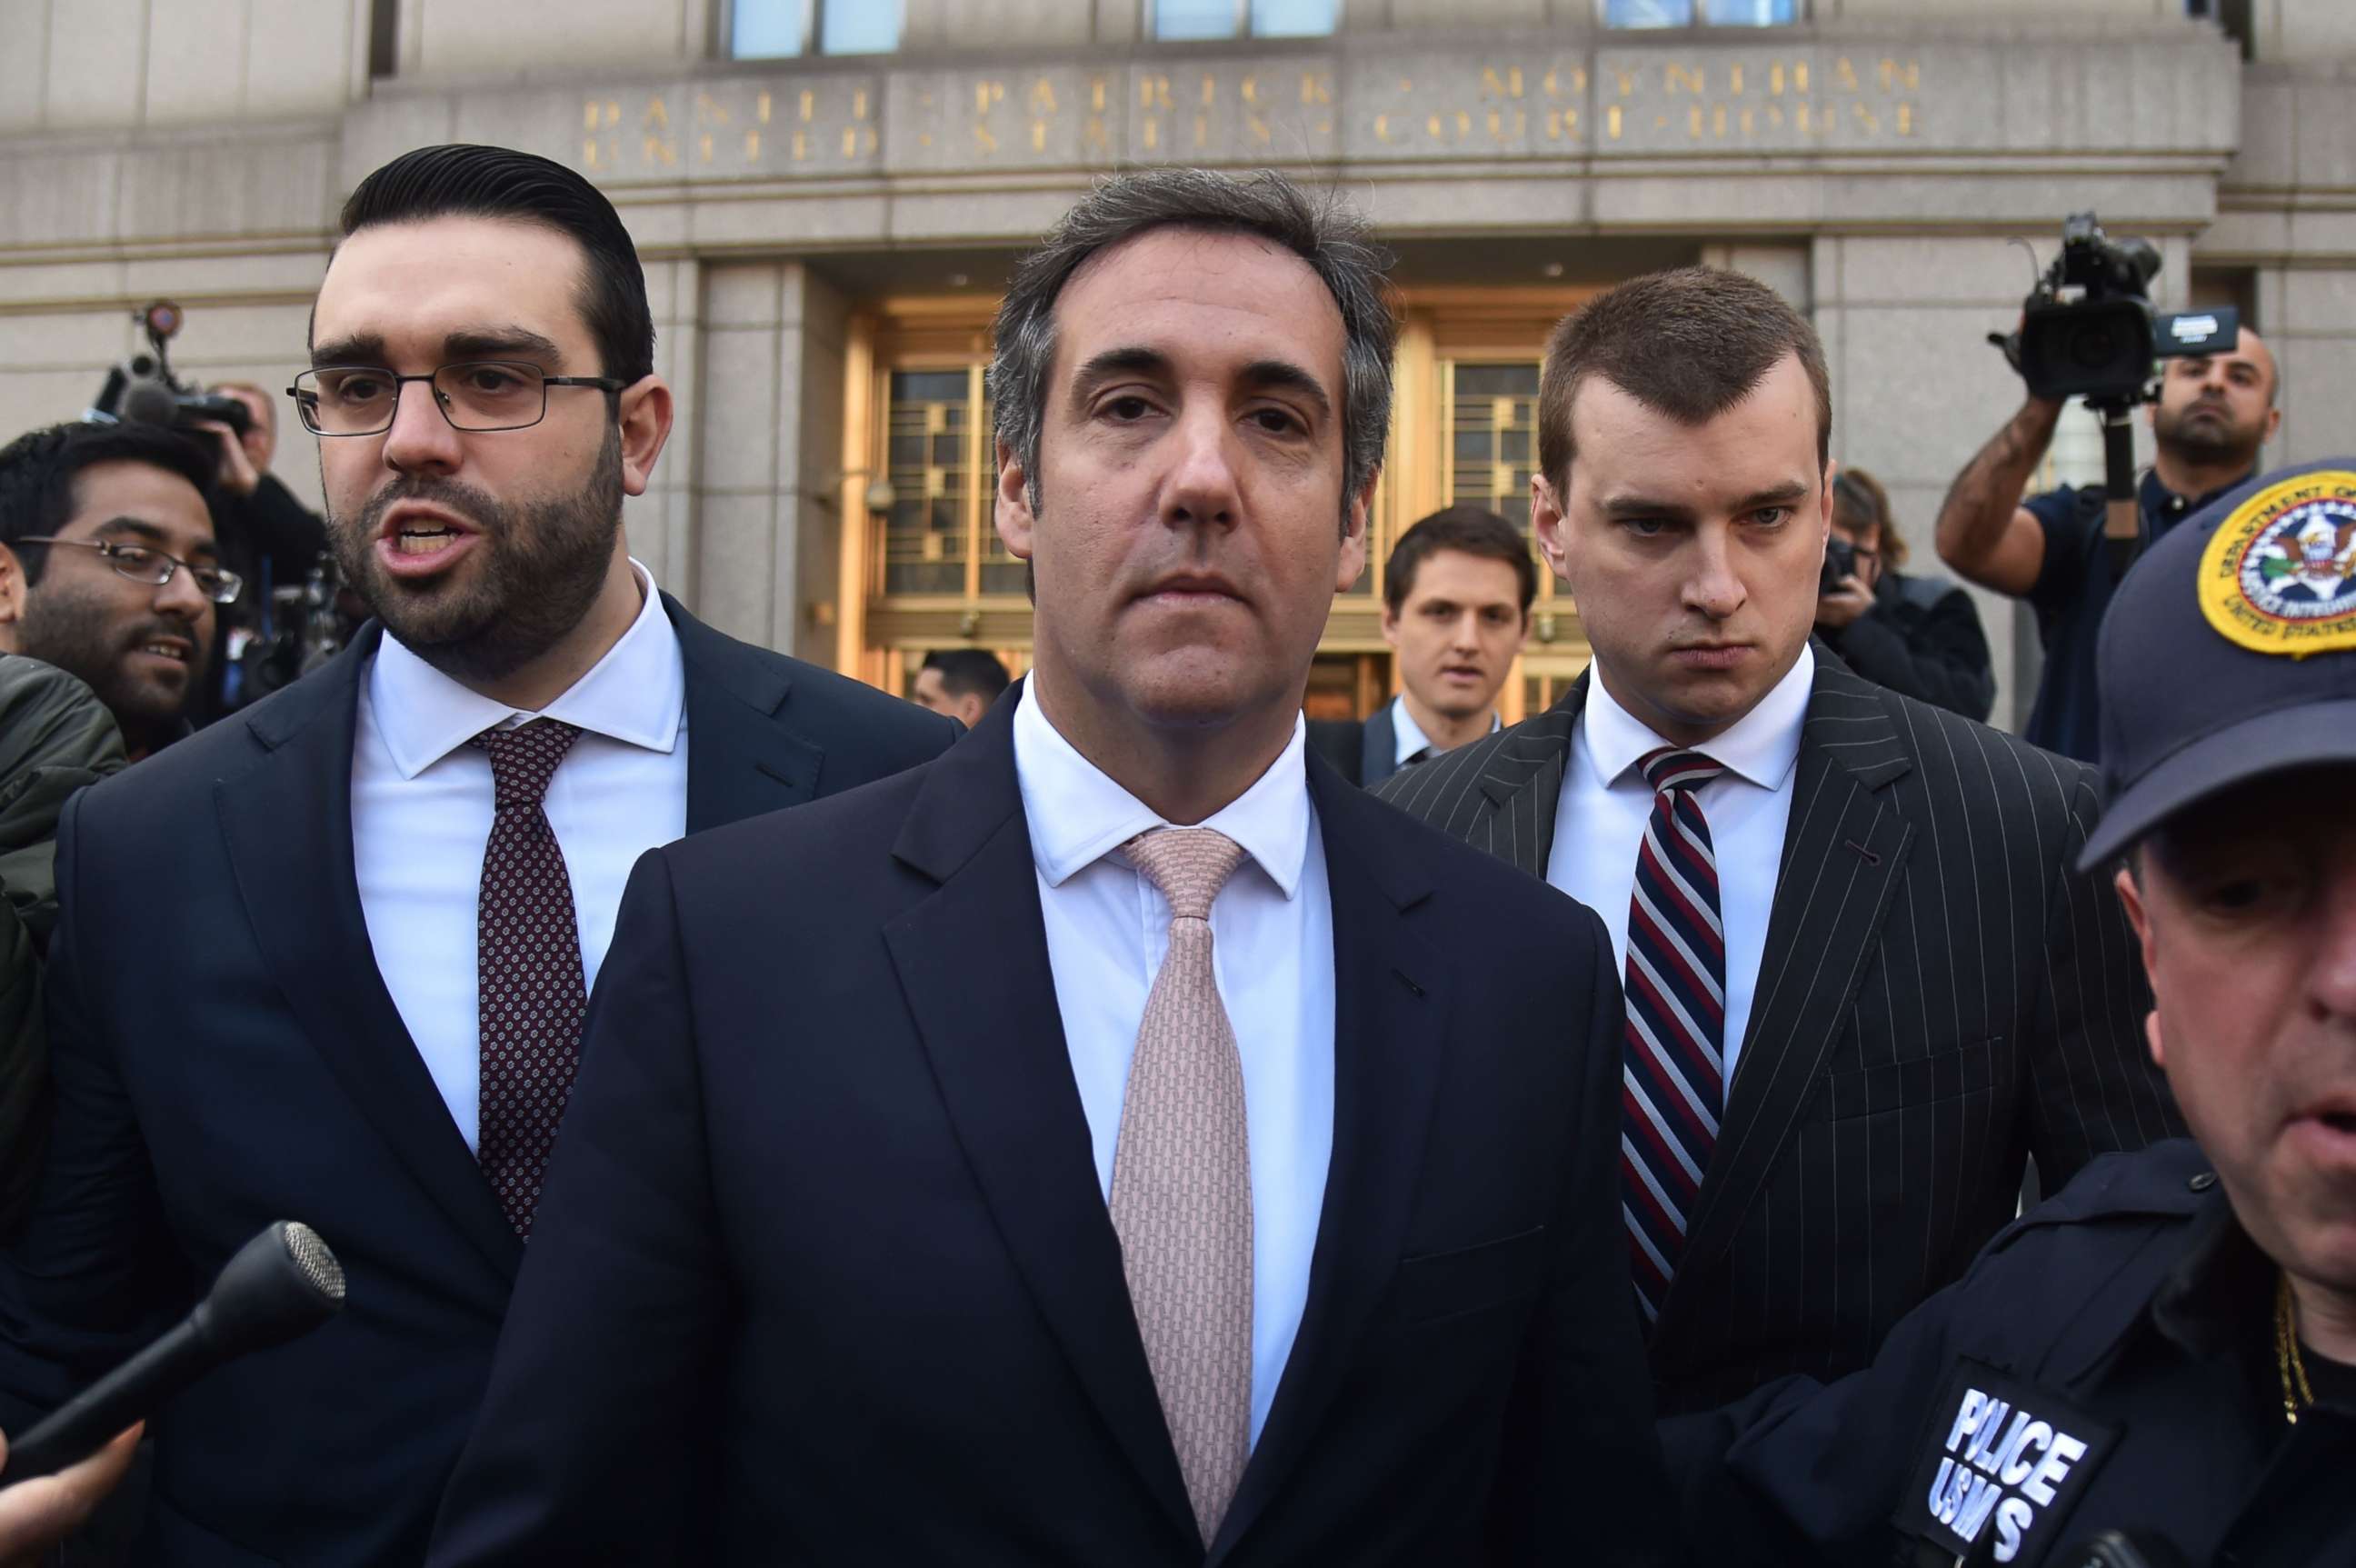 PHOTO: President Donald Trump's personal lawyer Michael Cohen leaves the federal courthouse in New York City, April 26, 2018.